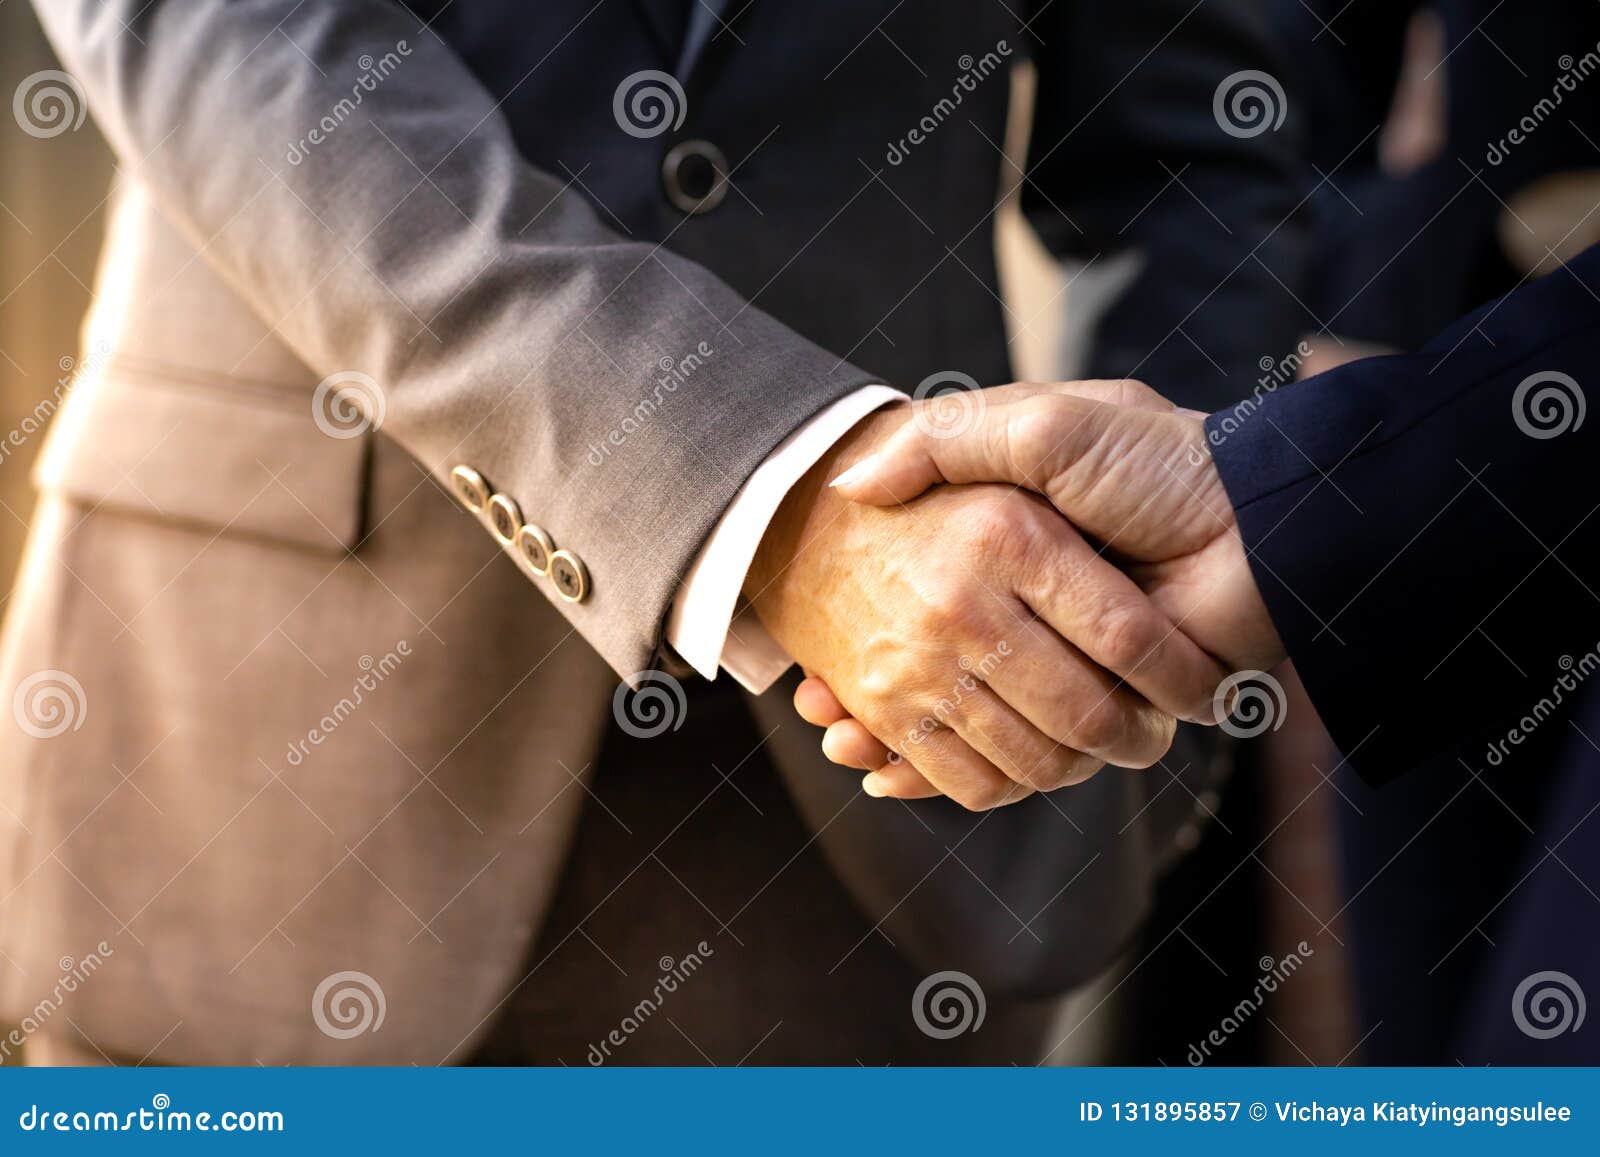 business deal mergers and acquisitions